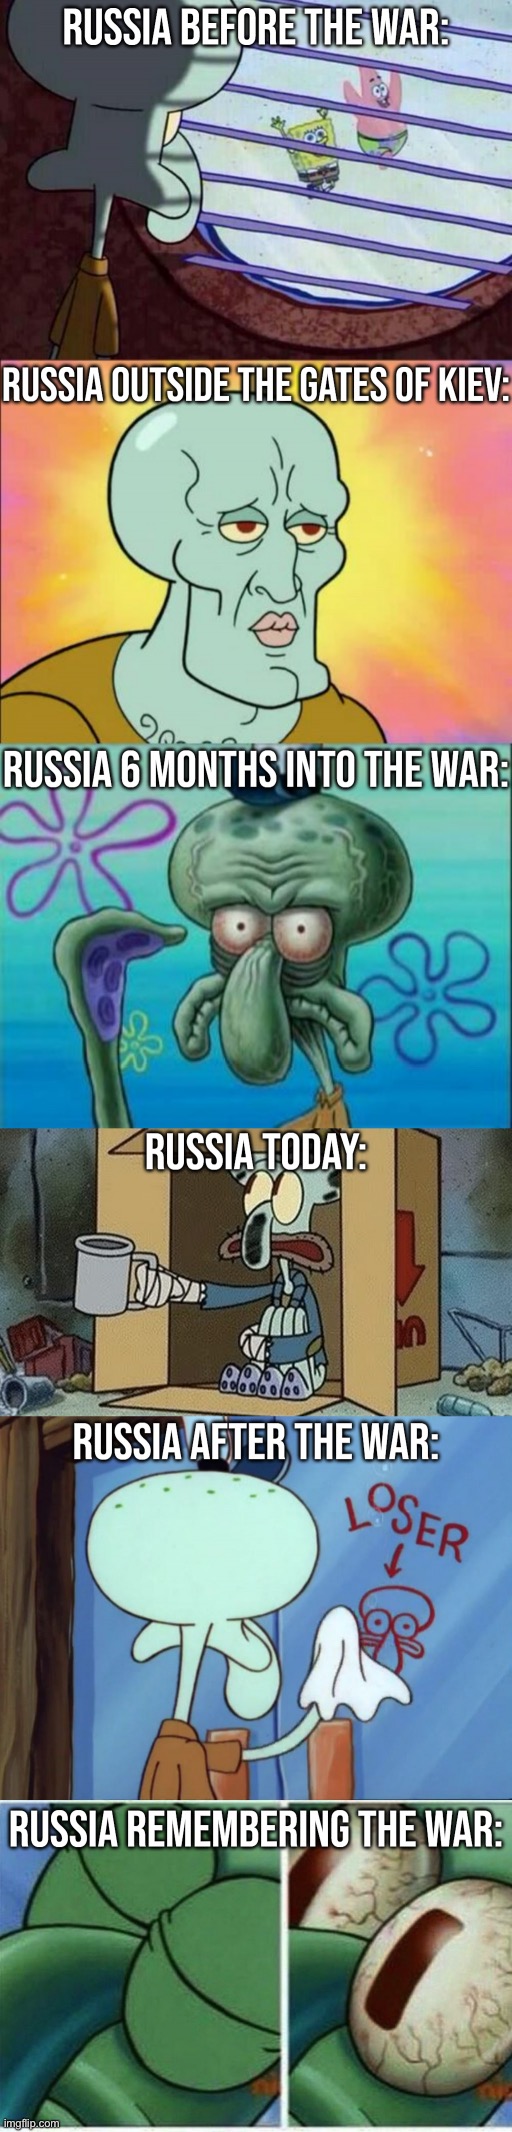 The Russo-Ukrainian War, a modern history as told by Squidward. Russophobia | image tagged in russo-ukrainian war as told by squidward,russophobia,russia,ukraine,ukrainian lives matter,russian lives matter | made w/ Imgflip meme maker